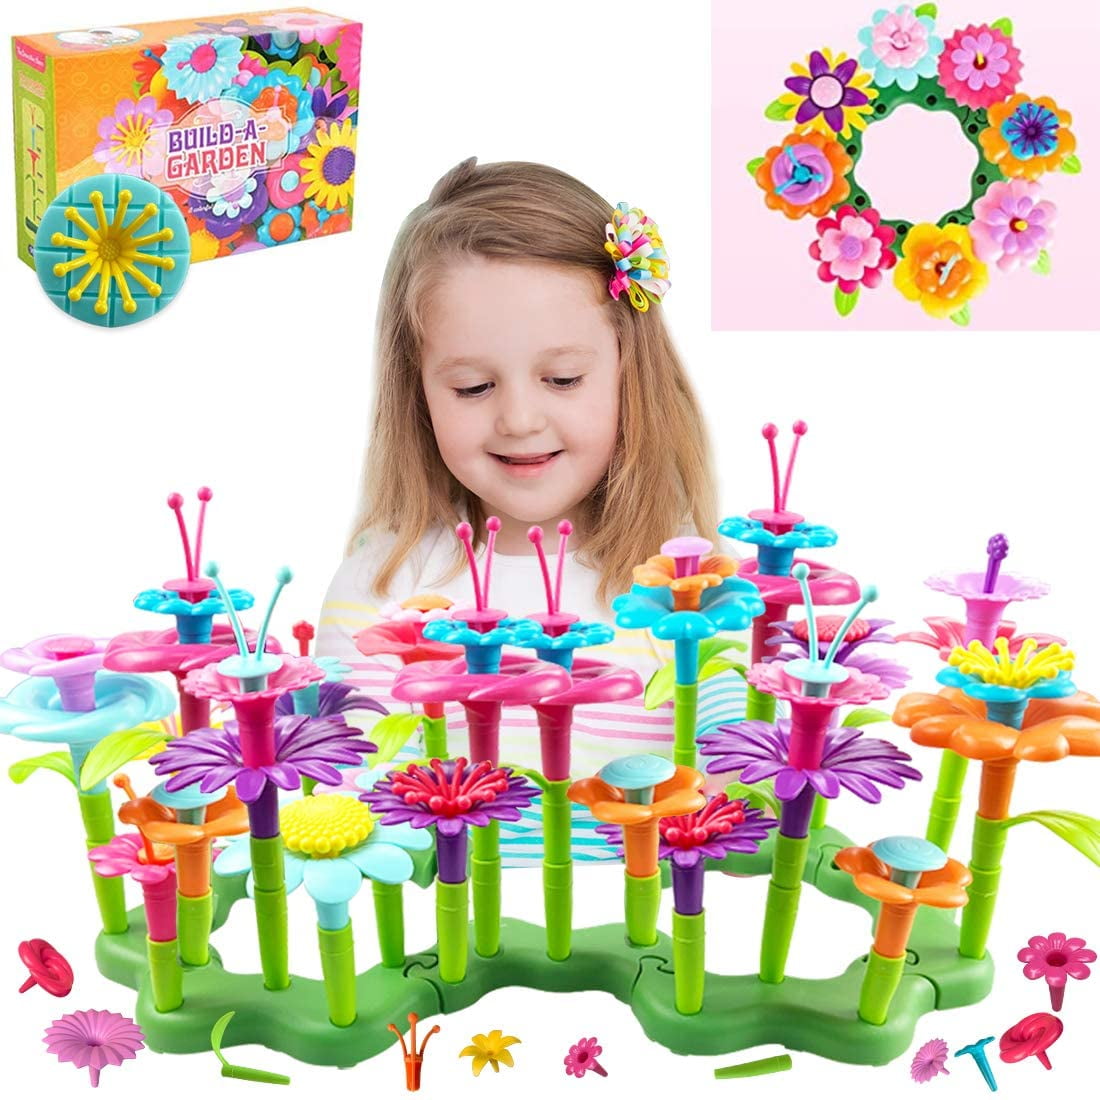 Birthday for 3-7 Year Old Kids Girls Boys Toddlers LETS GO Great Toys for Girls Boys Kids Age 3-8 Waterproof Flower Garden Building Creative Toys for Kids Age 3-7 